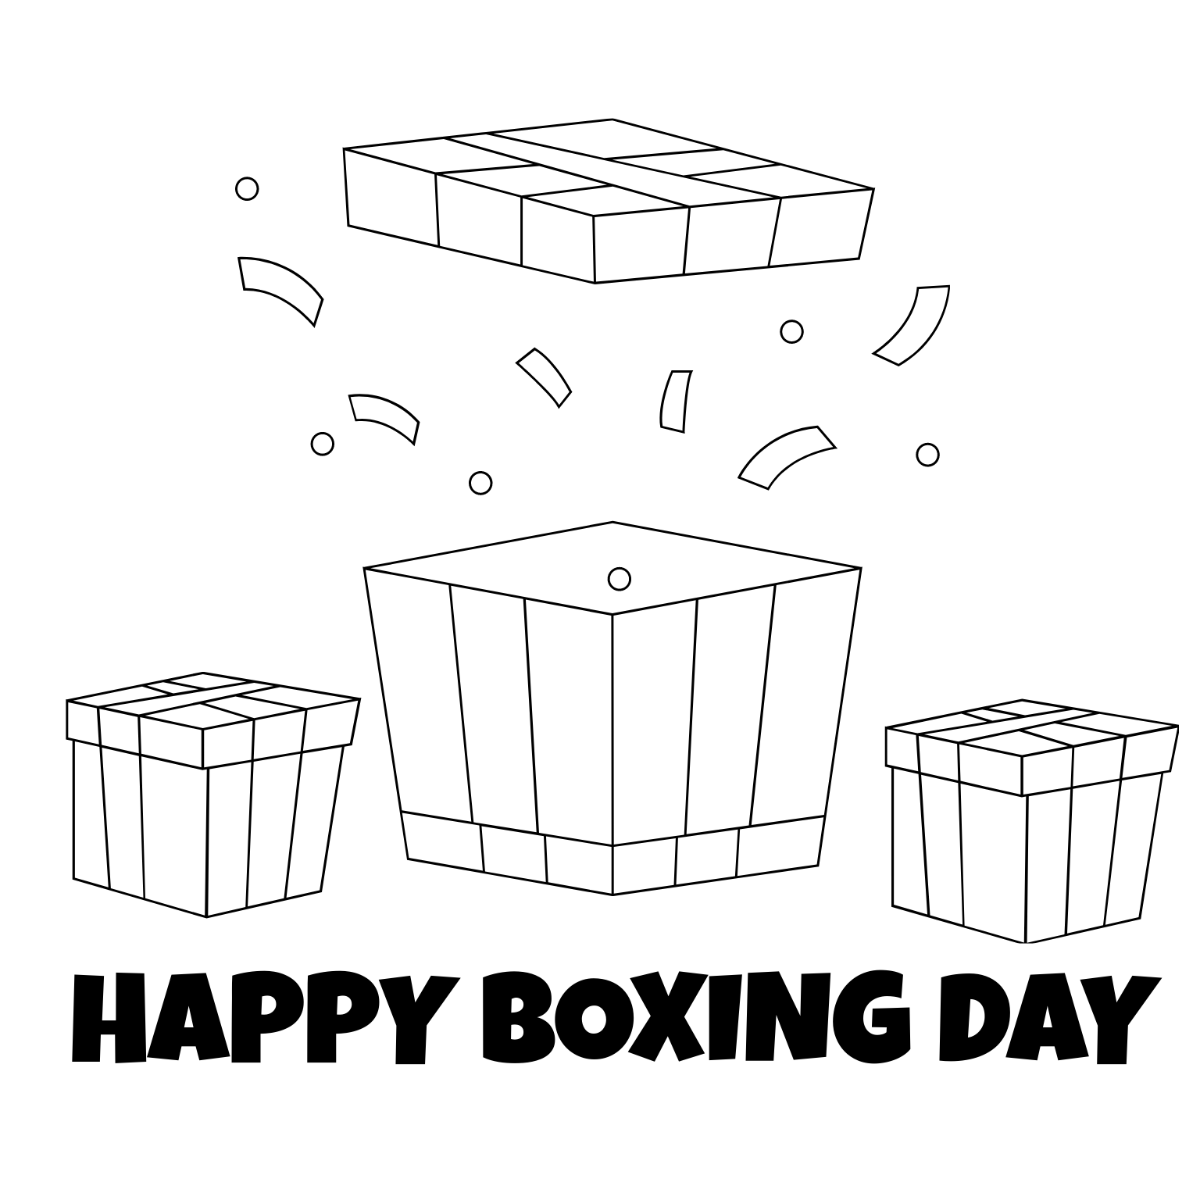 Boxing Day Image Drawing Template